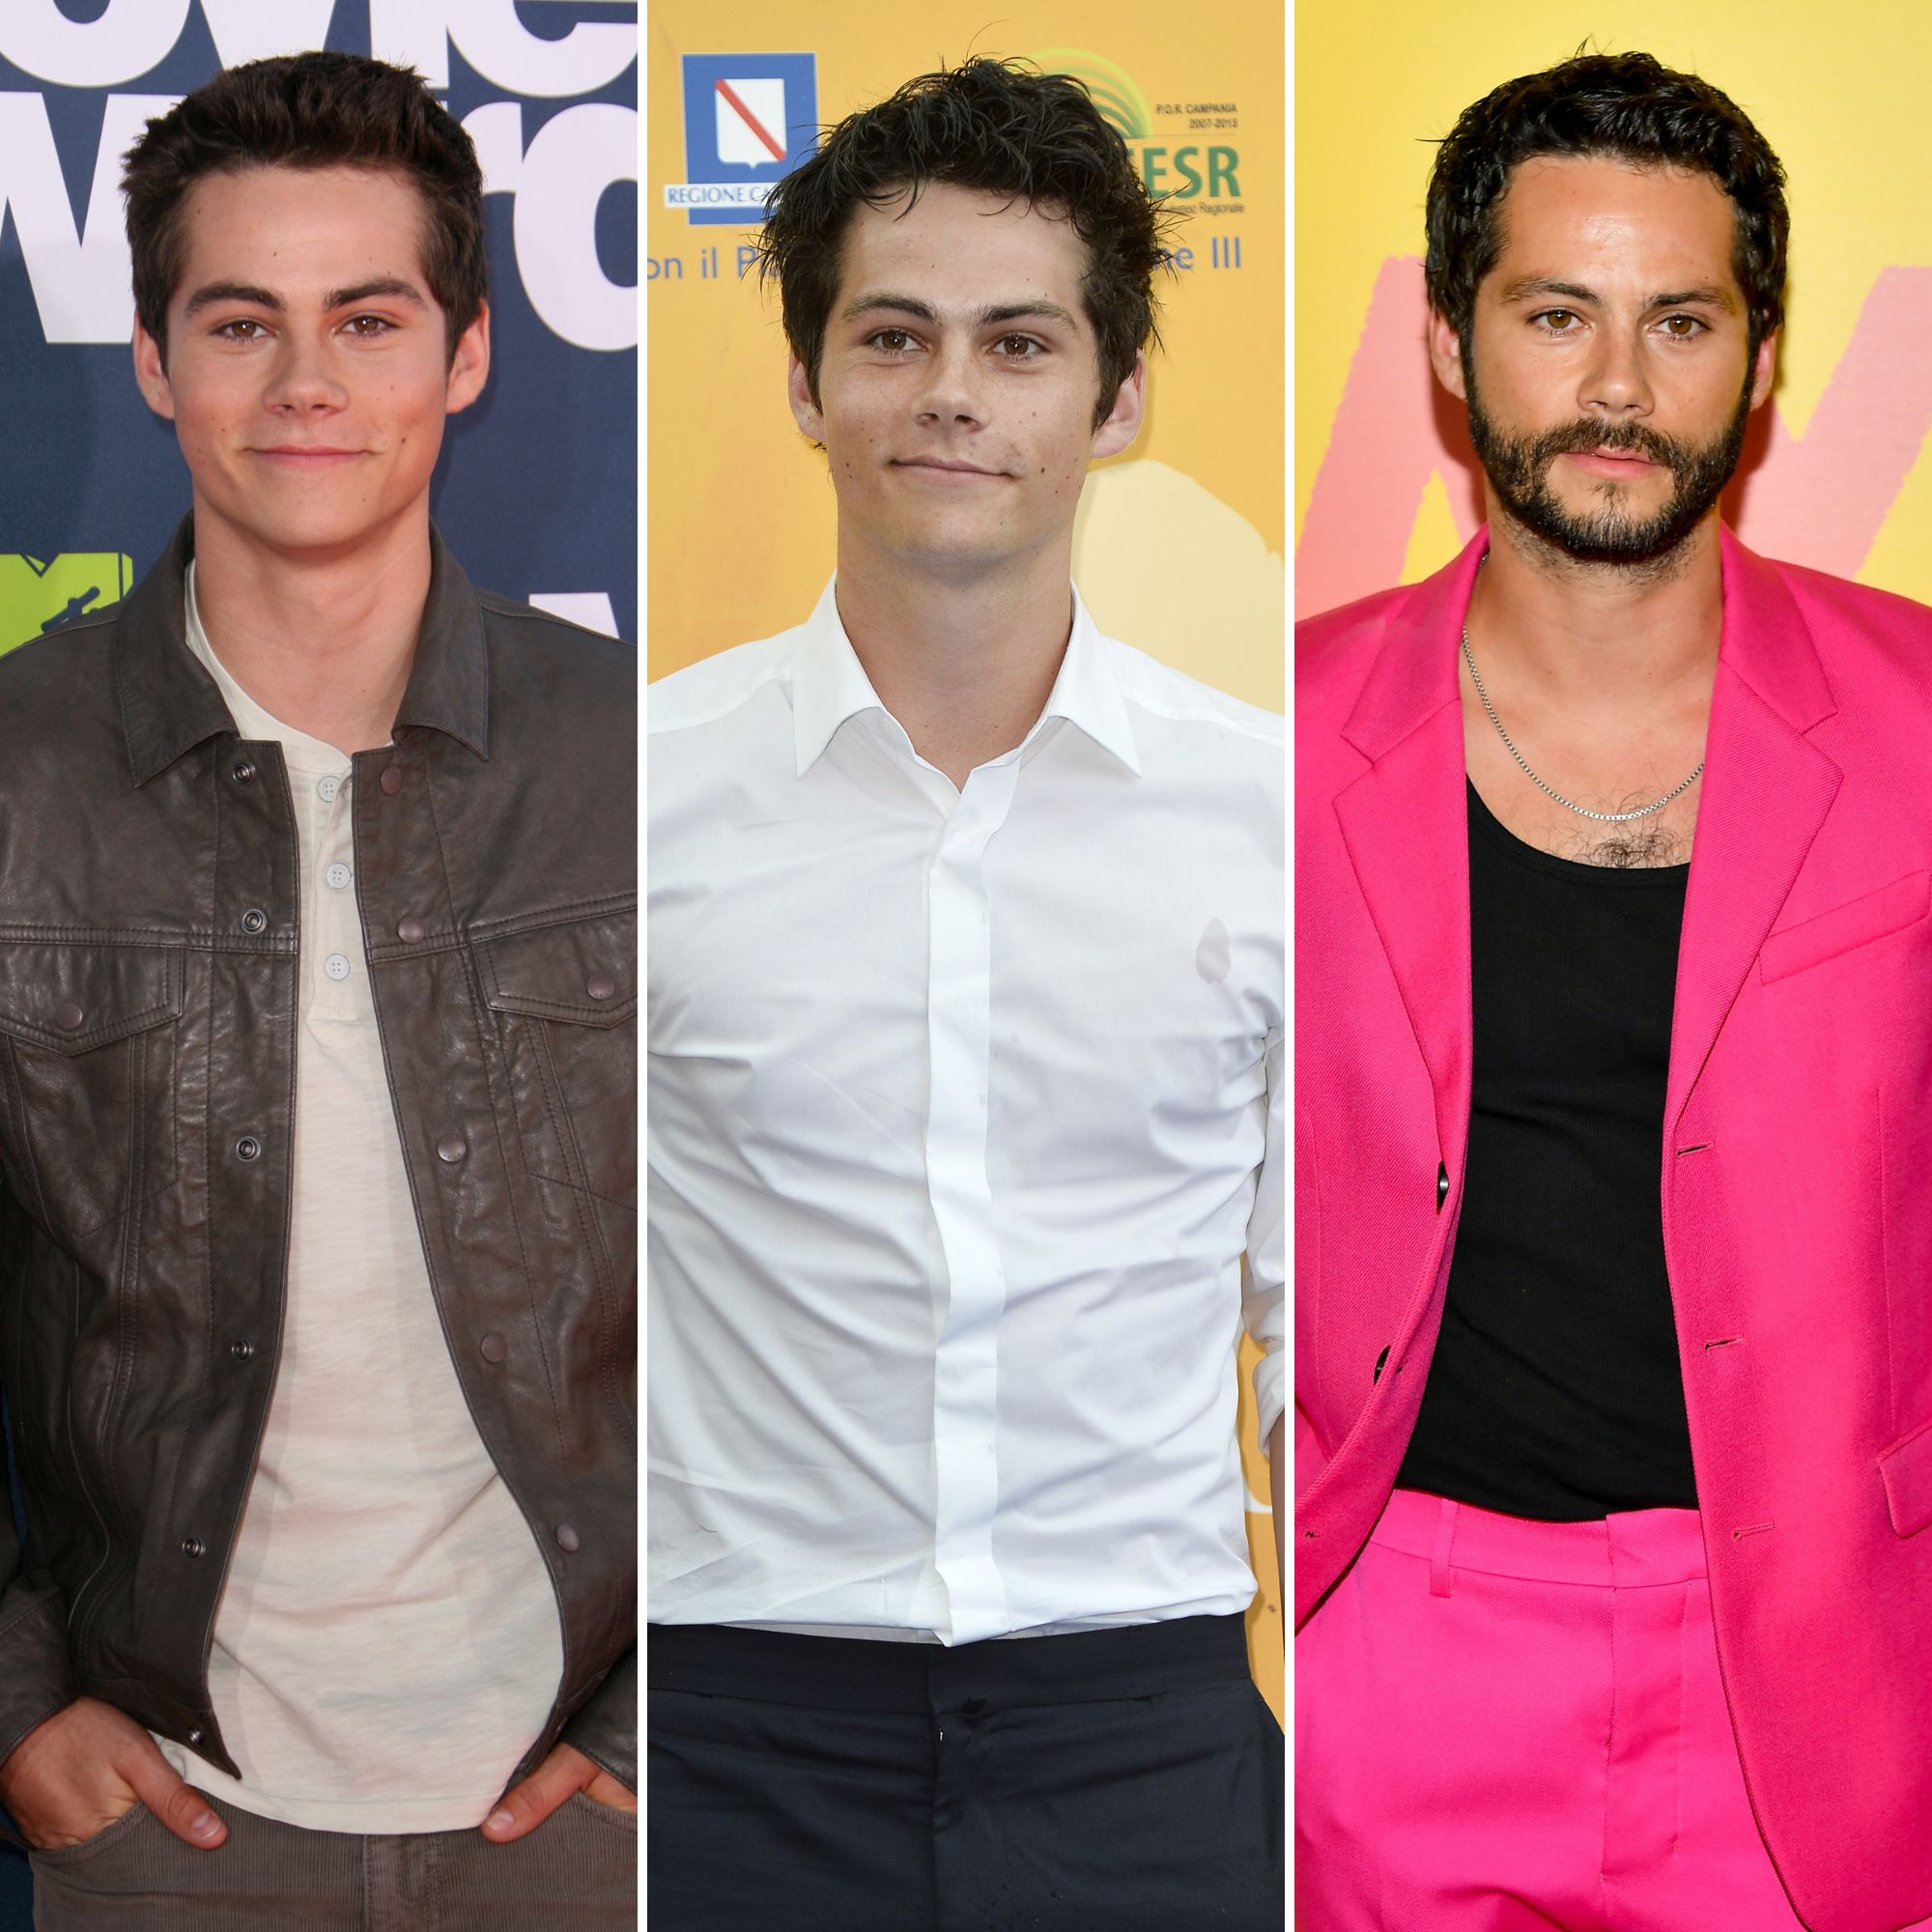 Dylan O'Brien's Transformation in Photos: 'Teen Wolf' to Now